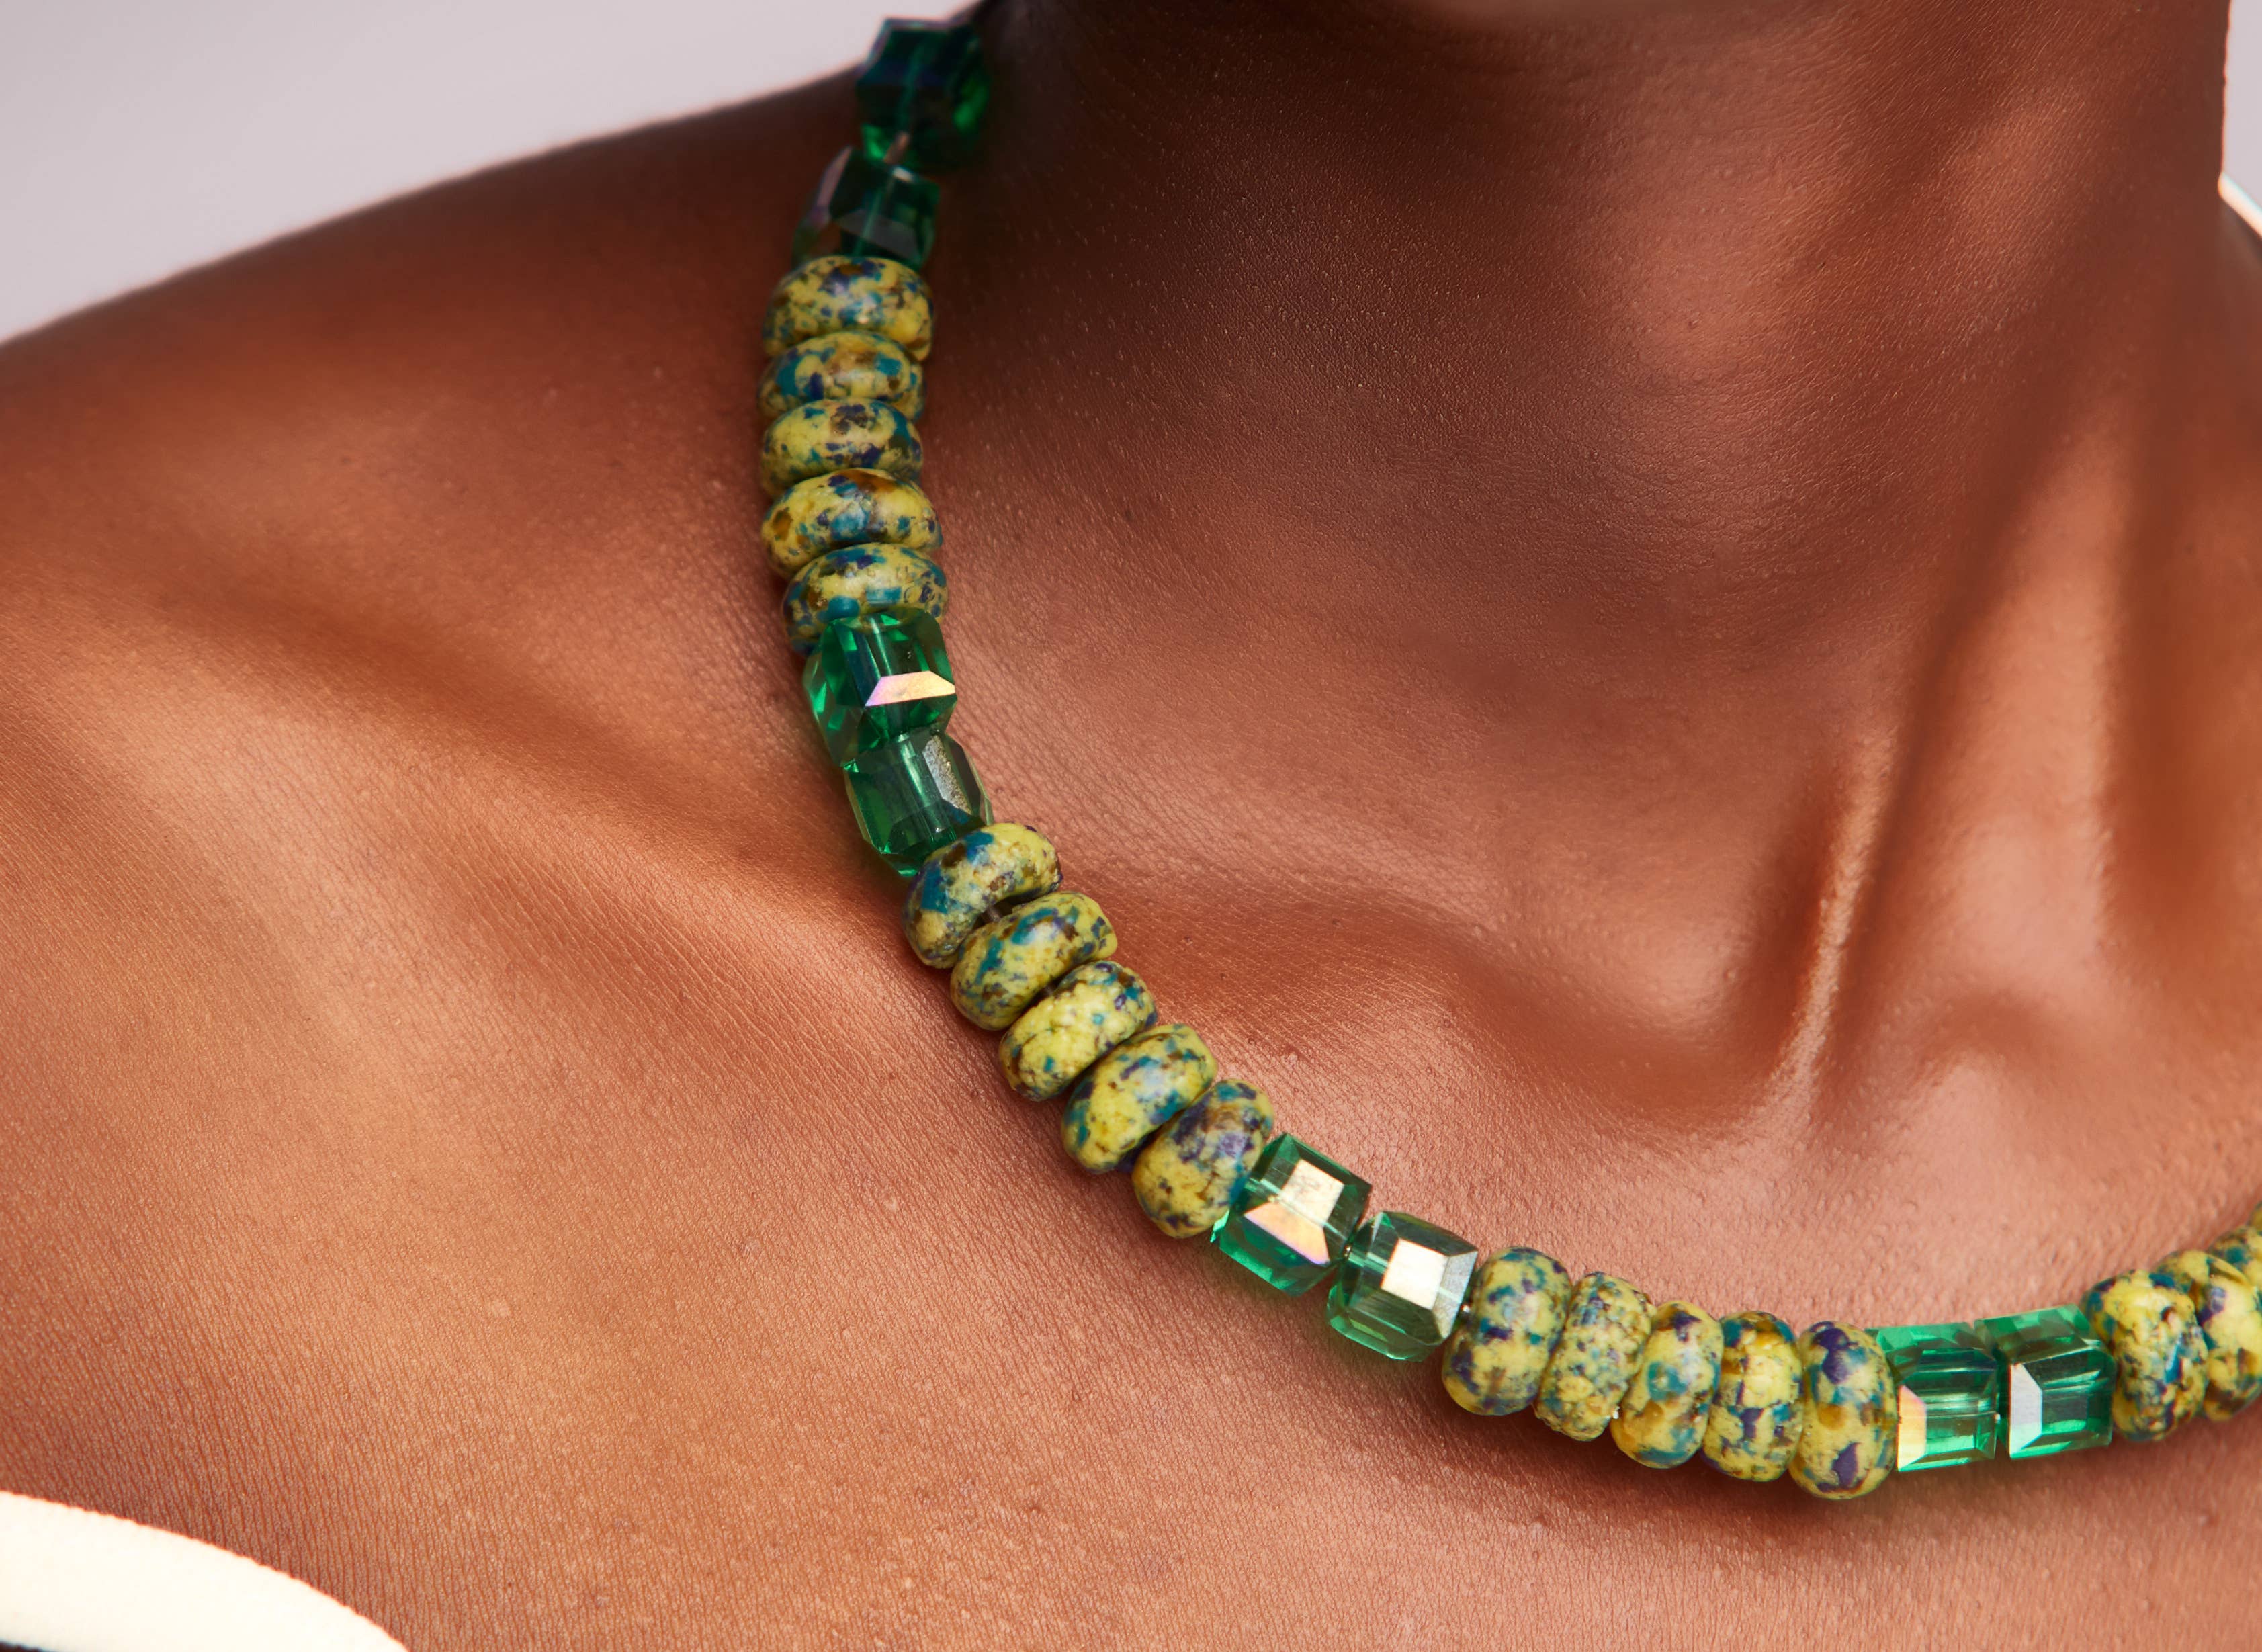 Fluted Emerald and Gold Beads Necklace - Eleuteri